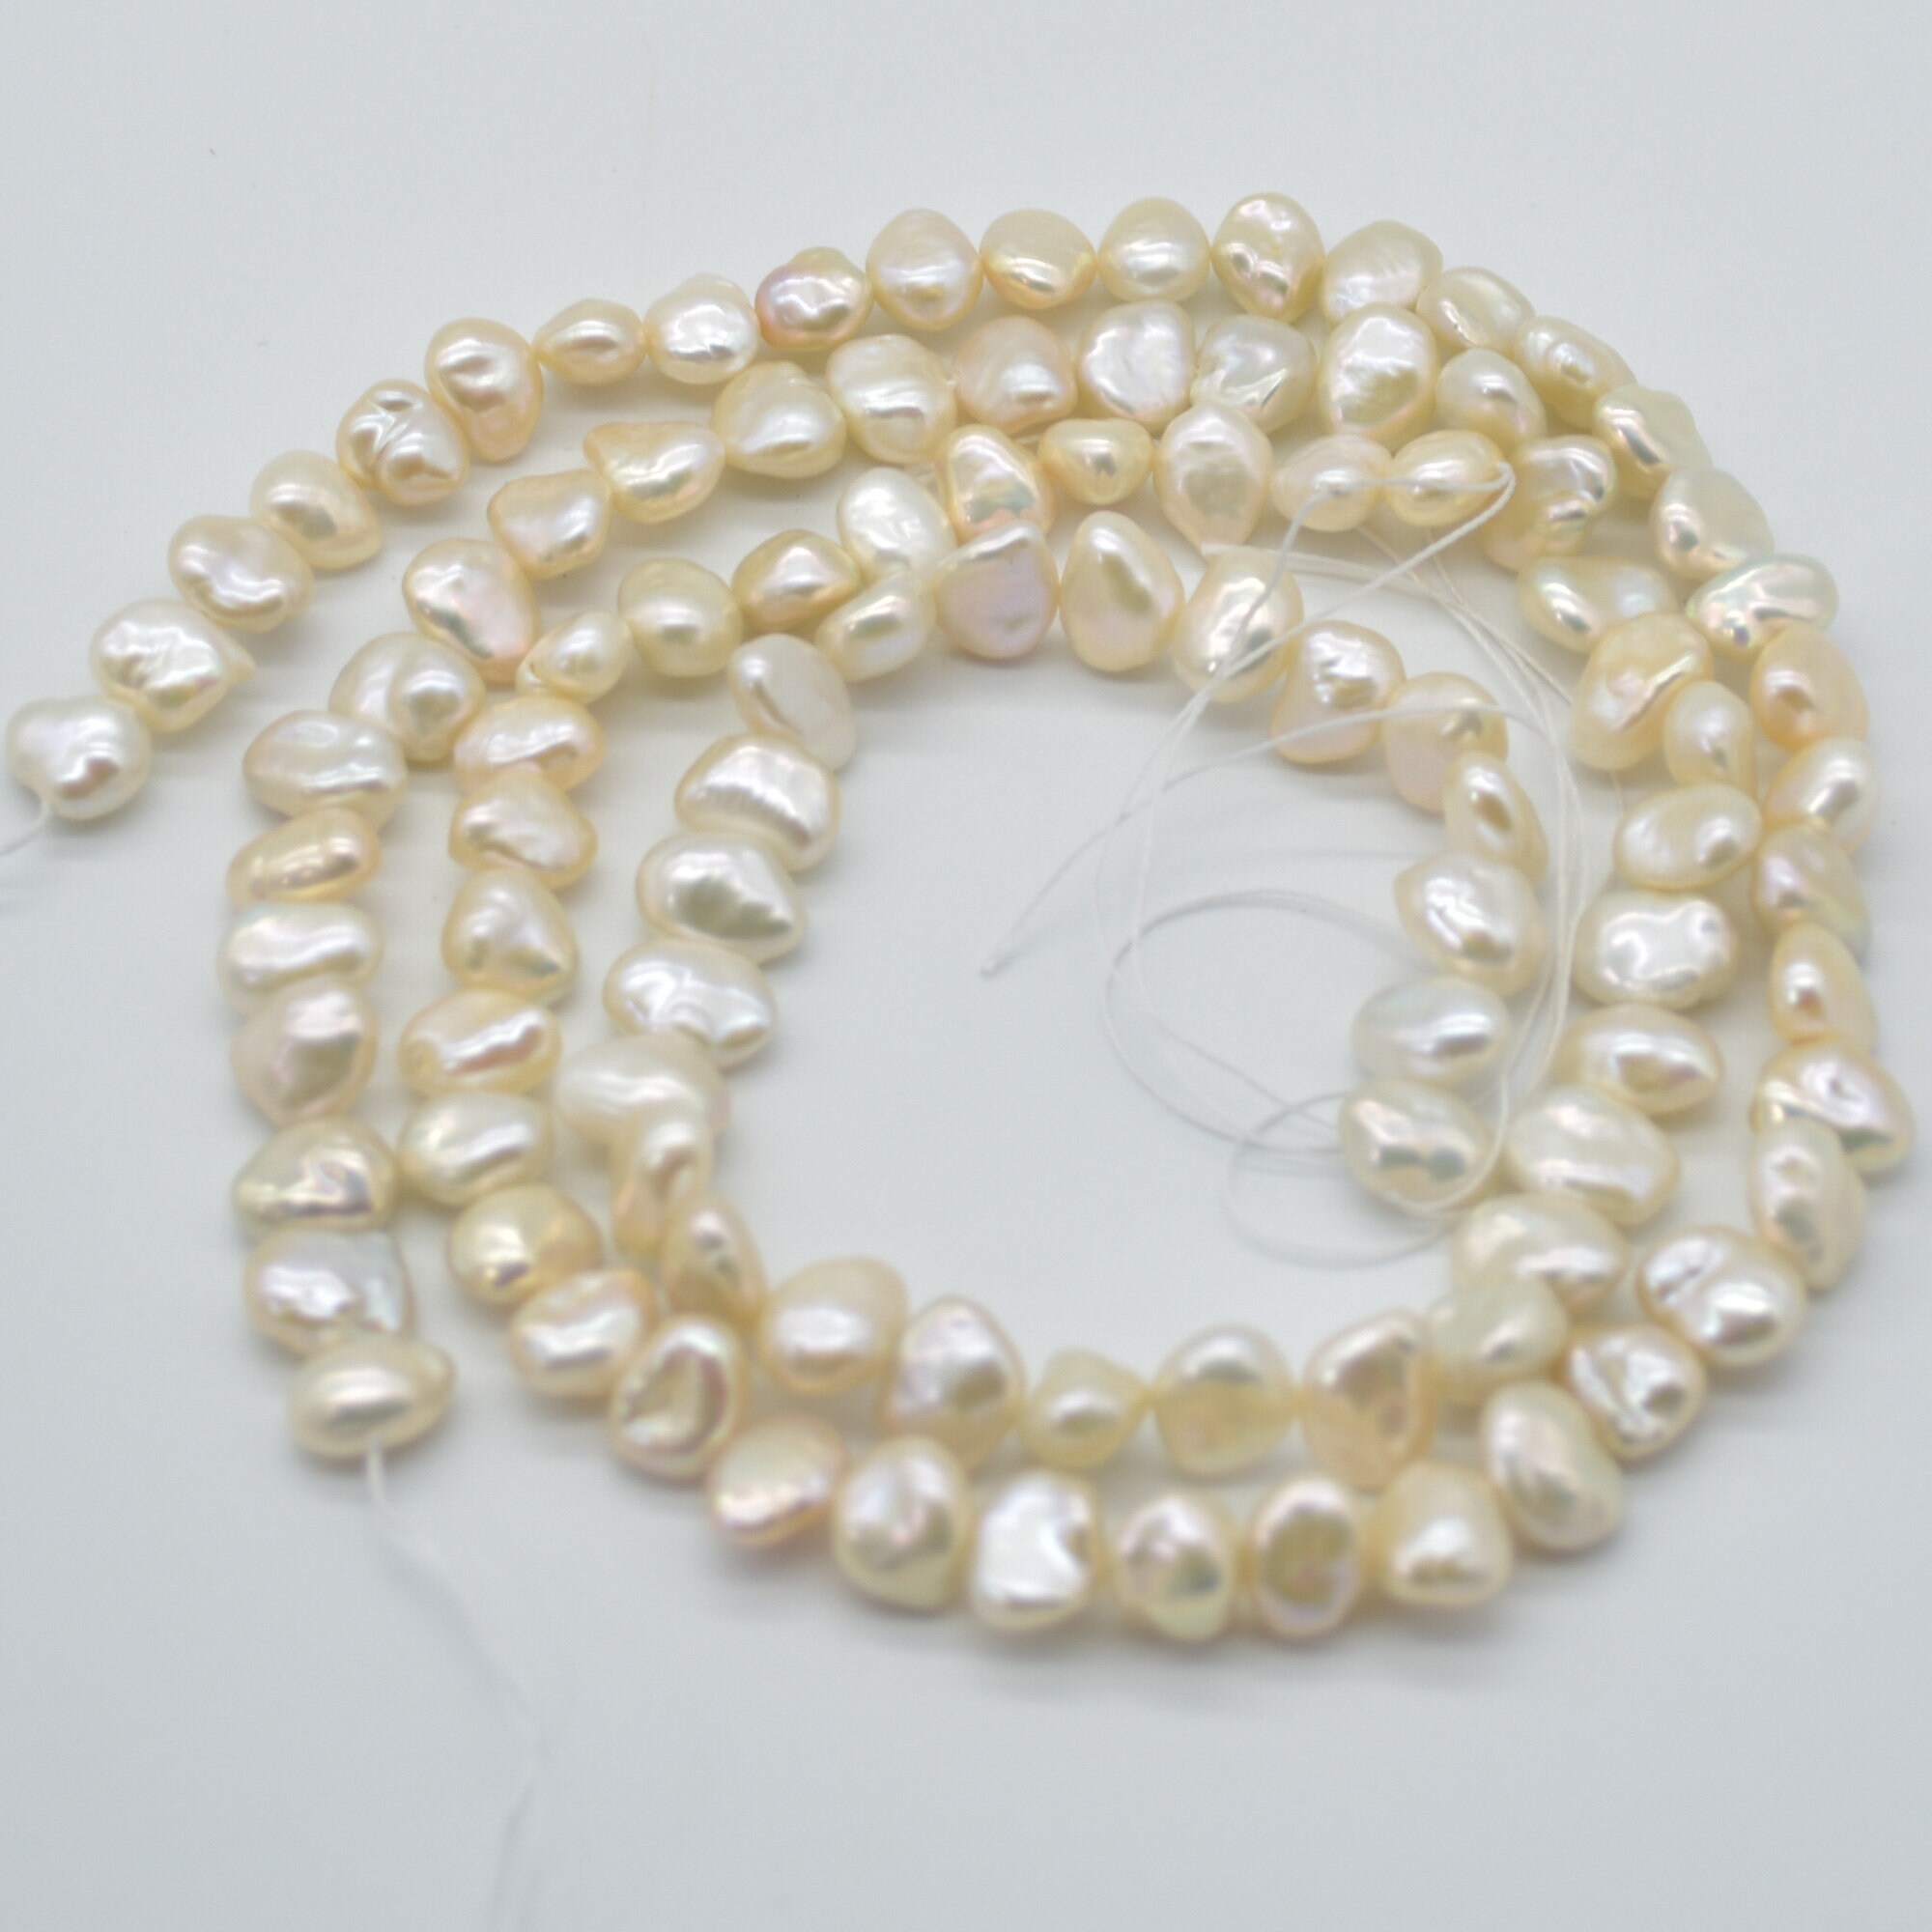 7-8mm Natural White Purple Akoya Cultured Pearl Loose Beads 15" Strand Pink 